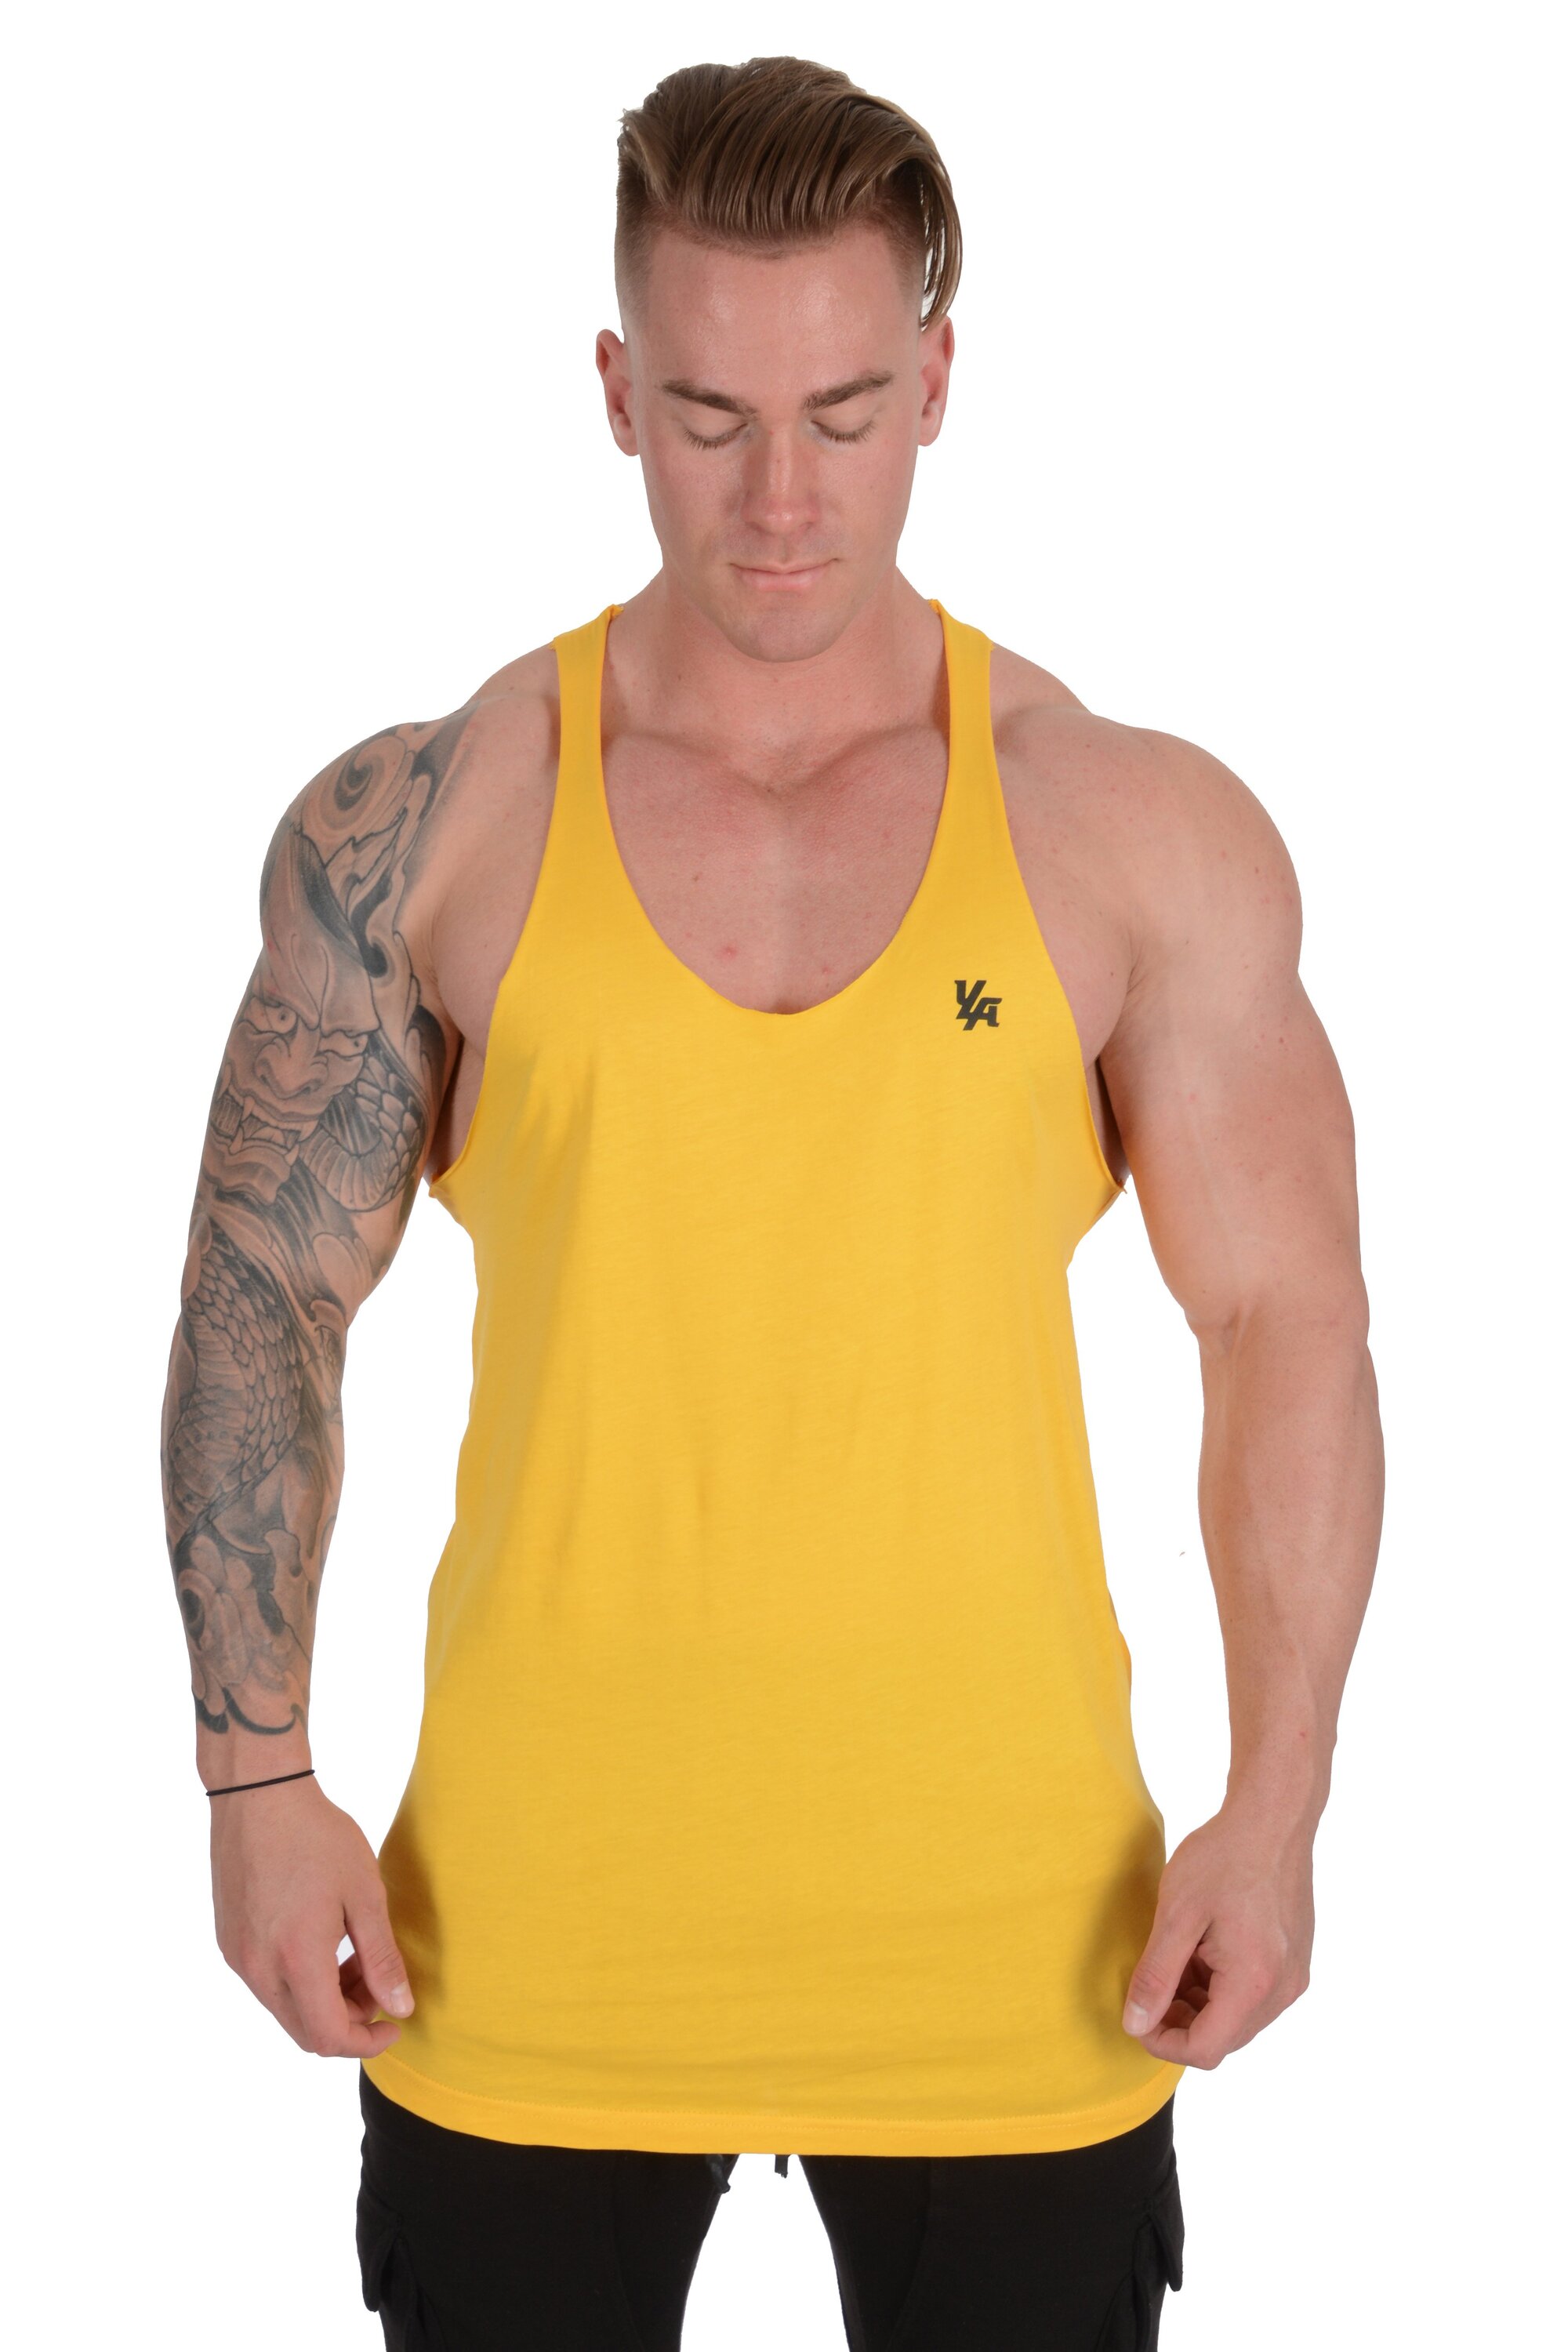 YoungLA Elongated Tank Tops for Men, Workout Muscle Gym Shirts, Bodybuilding Stringers